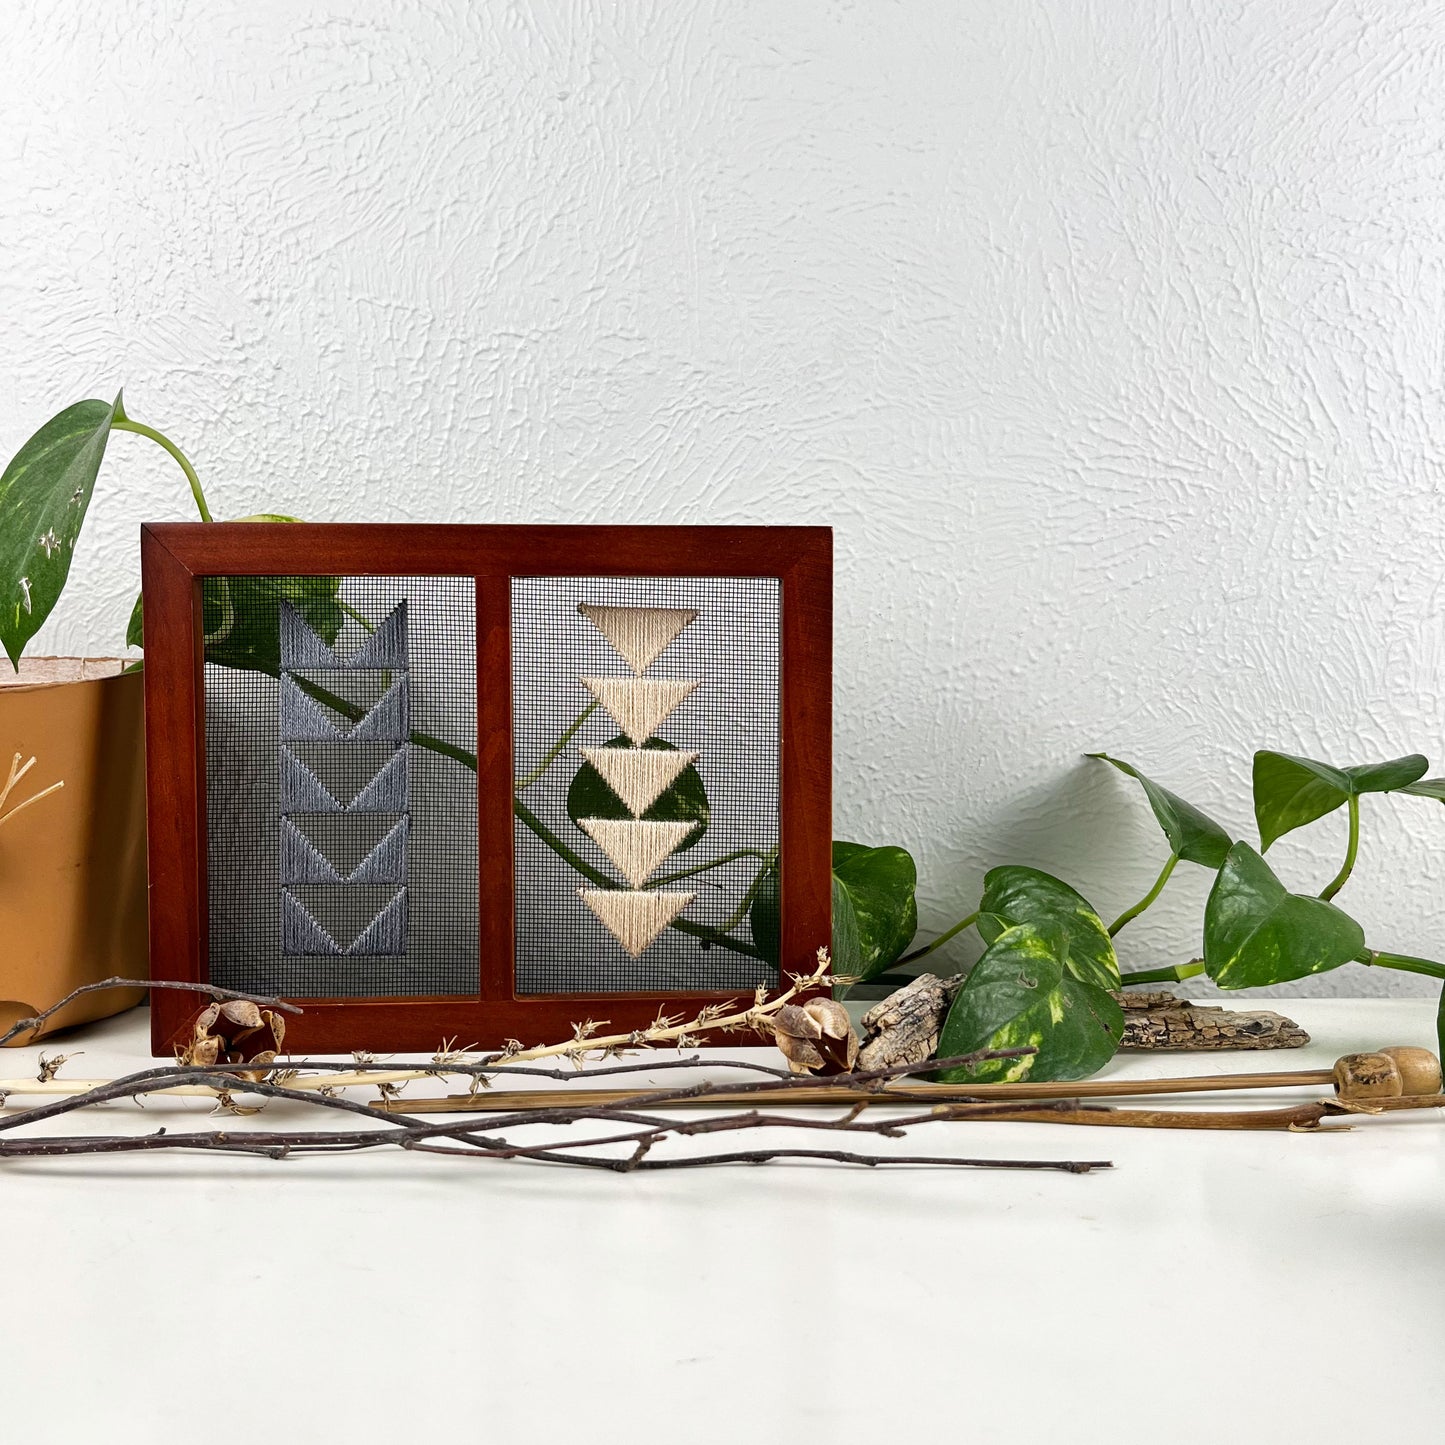 a piece of window screen hand stitched with two rows of triangles resembling the flying geese quilt blocks, in grey and peach, in a double wood frame, on a white counter, surrounded by a pothos vine, dried flowers and sticks